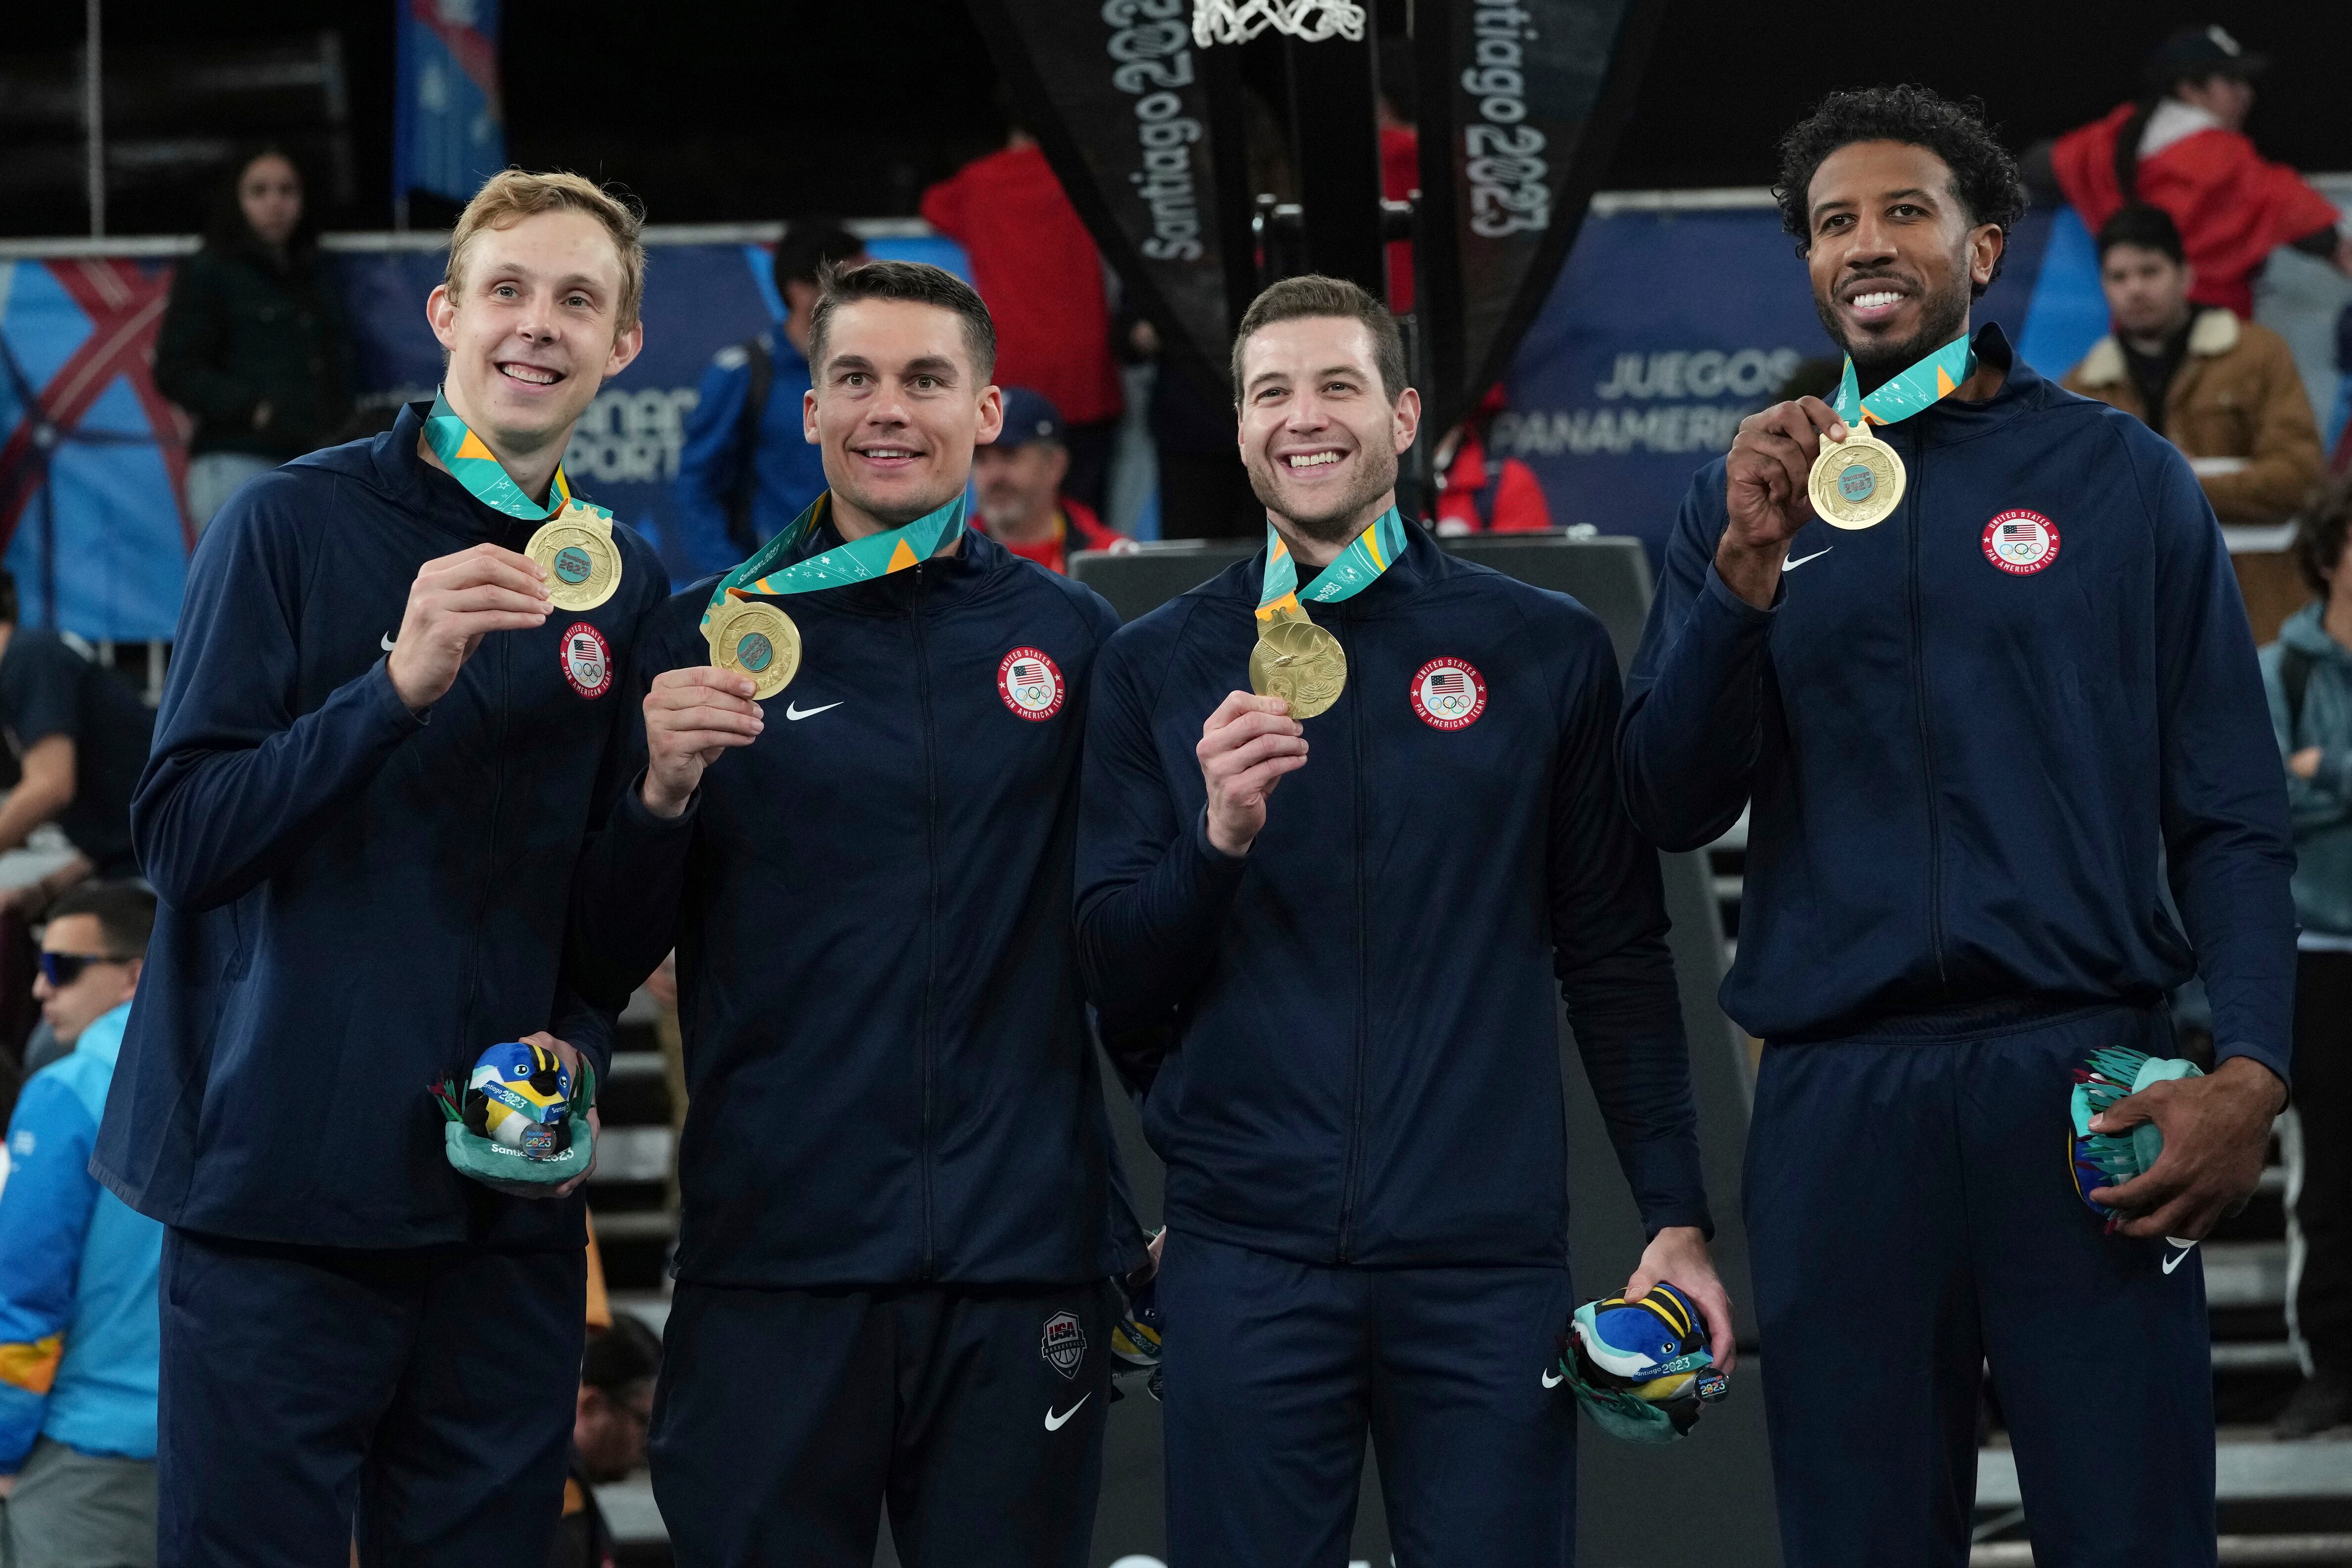 (Dolores Ochoa | AP) Jimmer Fredette, second from right, and the United States team celebrates with their gold medals on the podium of the men's 3x3 basketball at the Pan American Games in Santiago, Chile, Monday, Oct. 23, 2023.